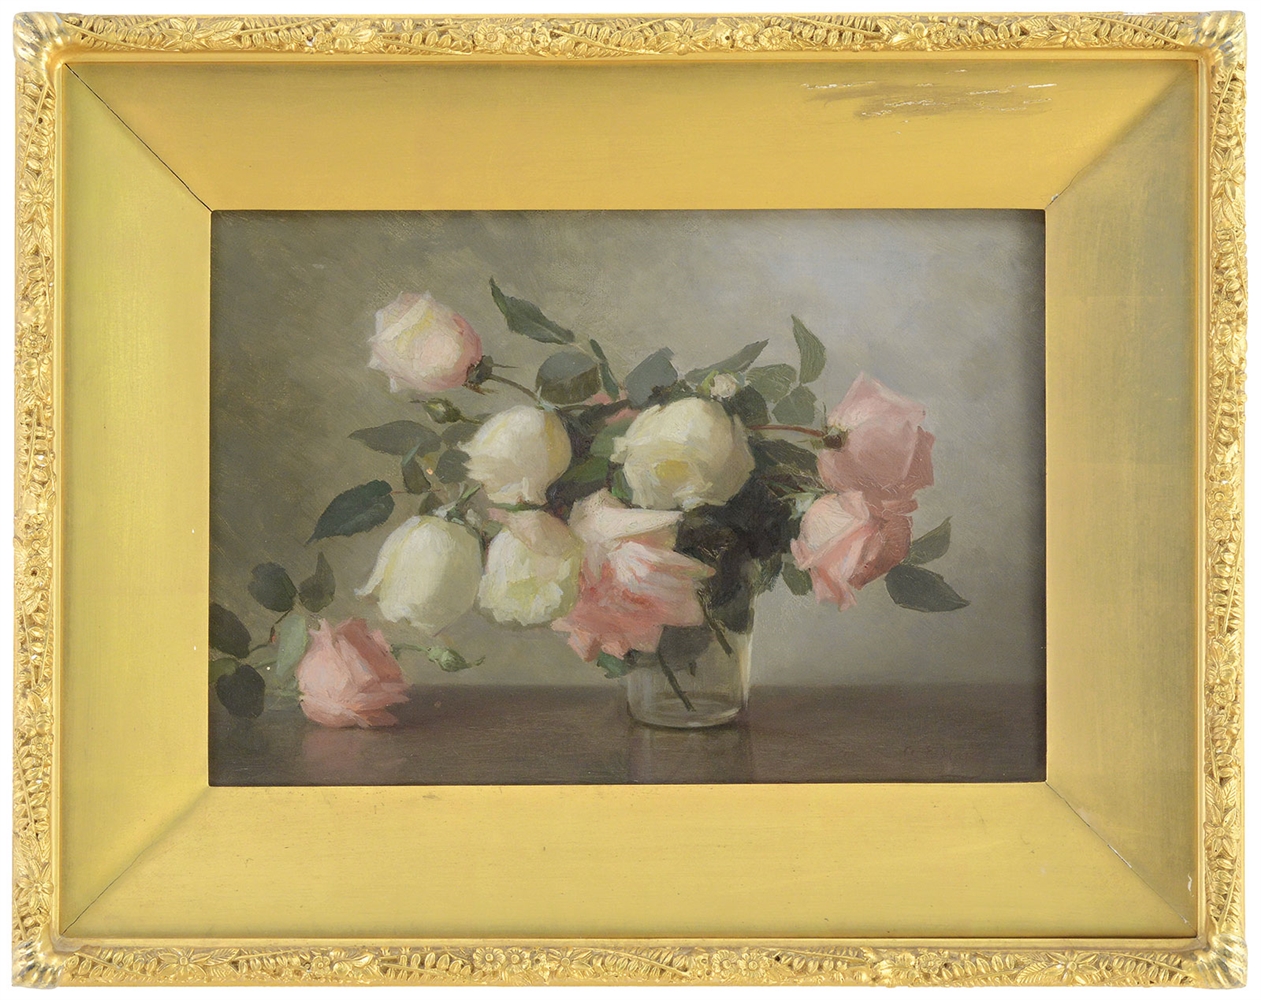 ANNA ELIZA HARDY (AMERICAN, 1839-1934) ARRANGEMENT OF WHITE AND PINK ROSES IN A GLASS VASE                                                                                                              